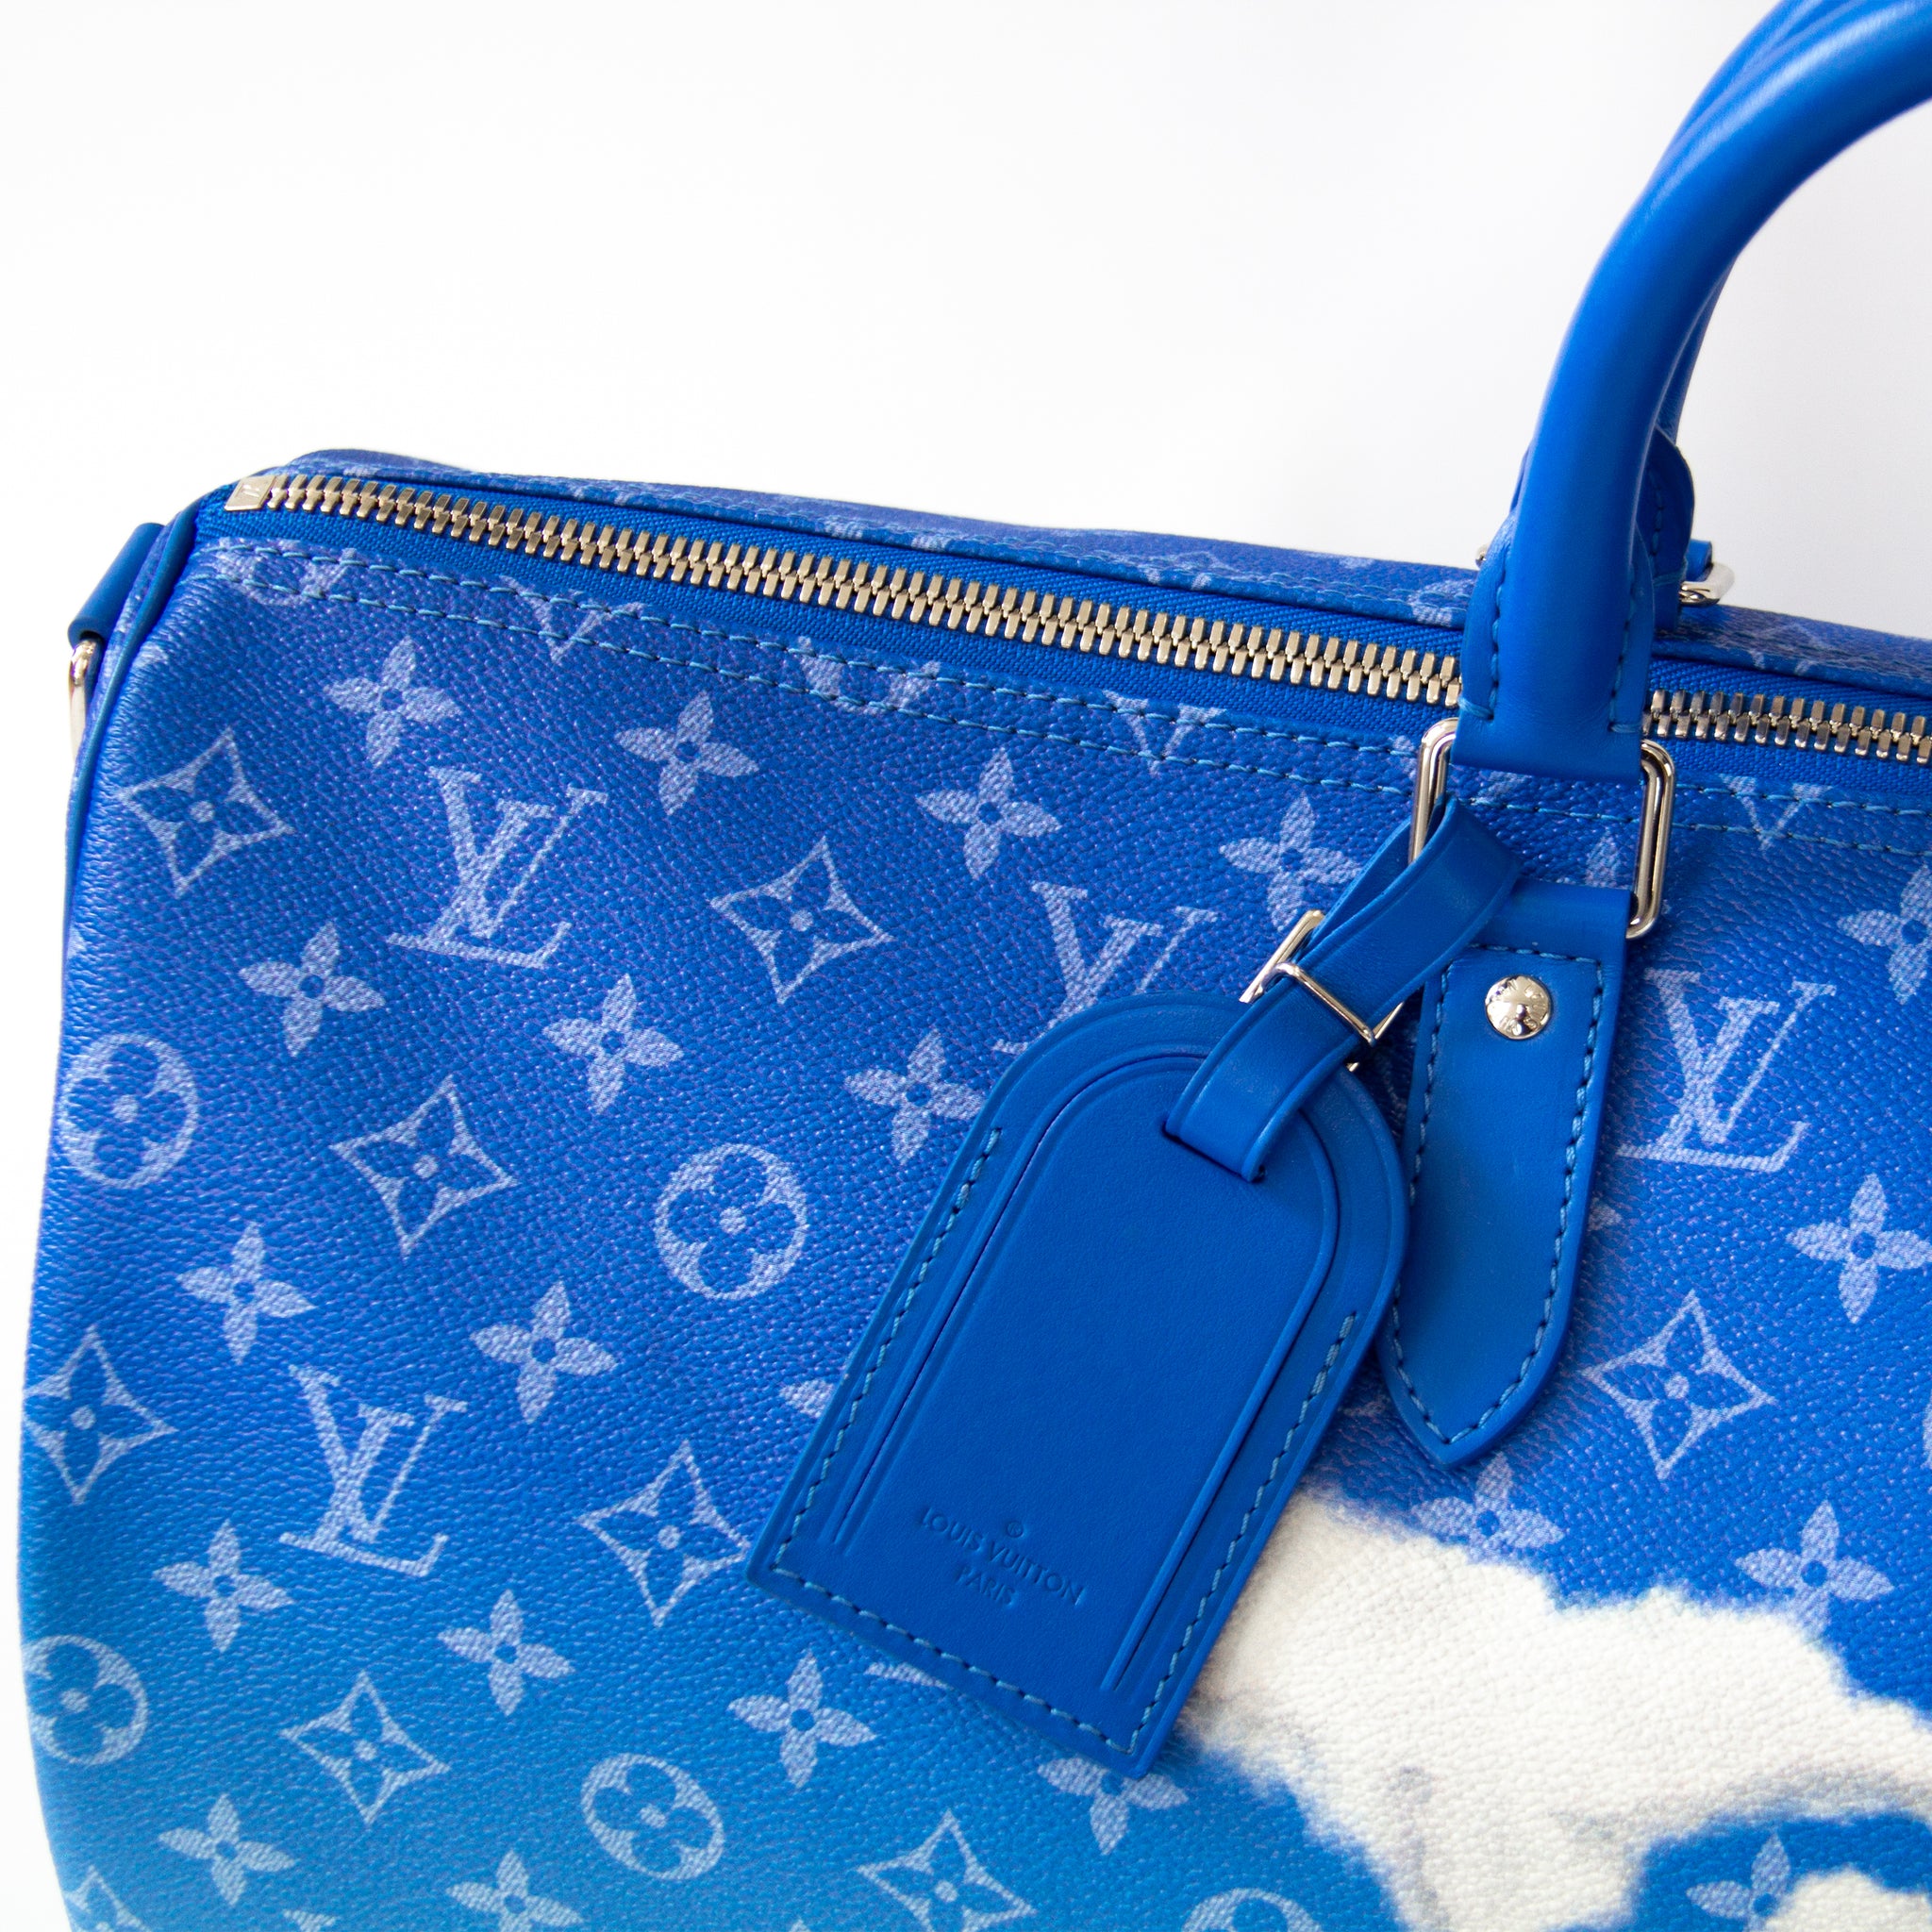 keepall bandouliere clouds